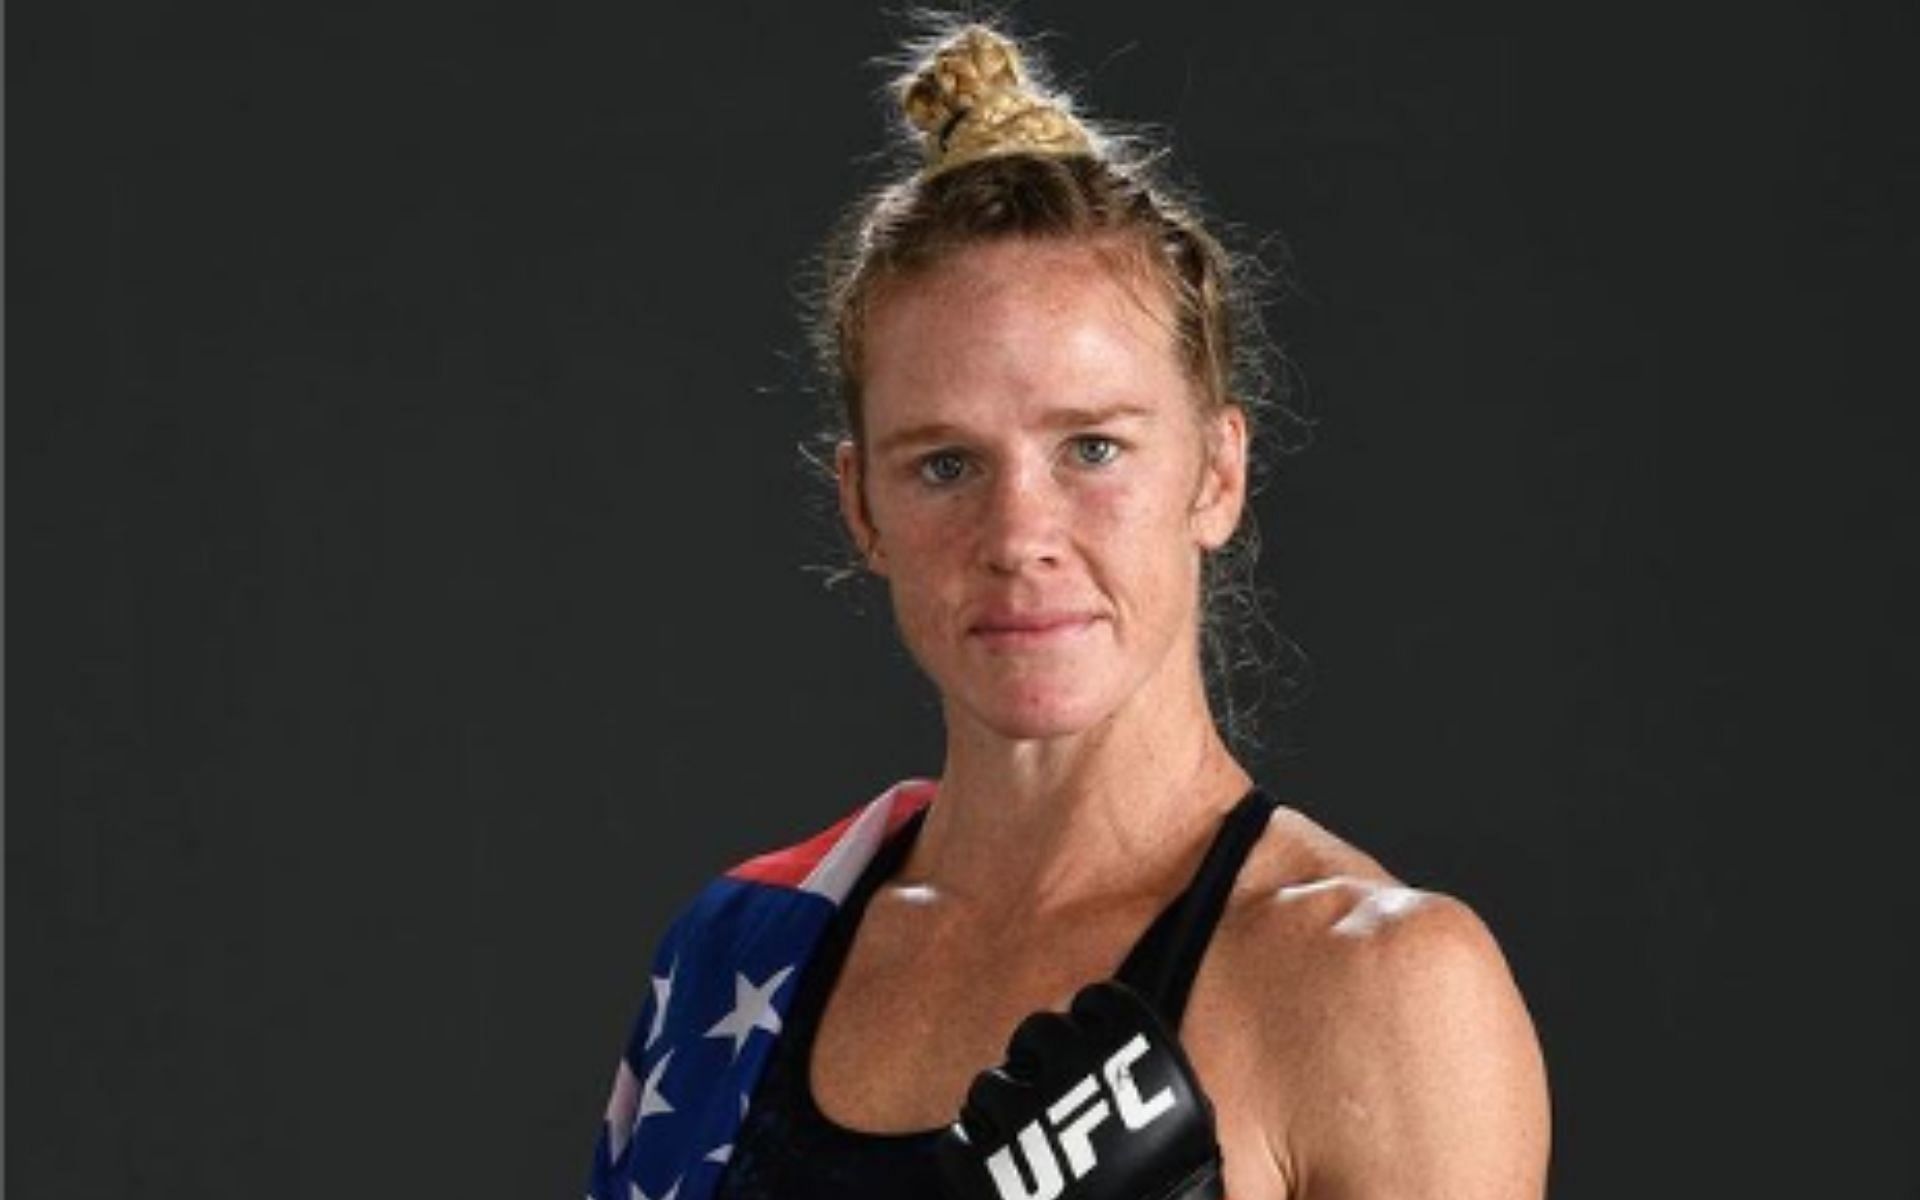 What surgery did Holly Holm have